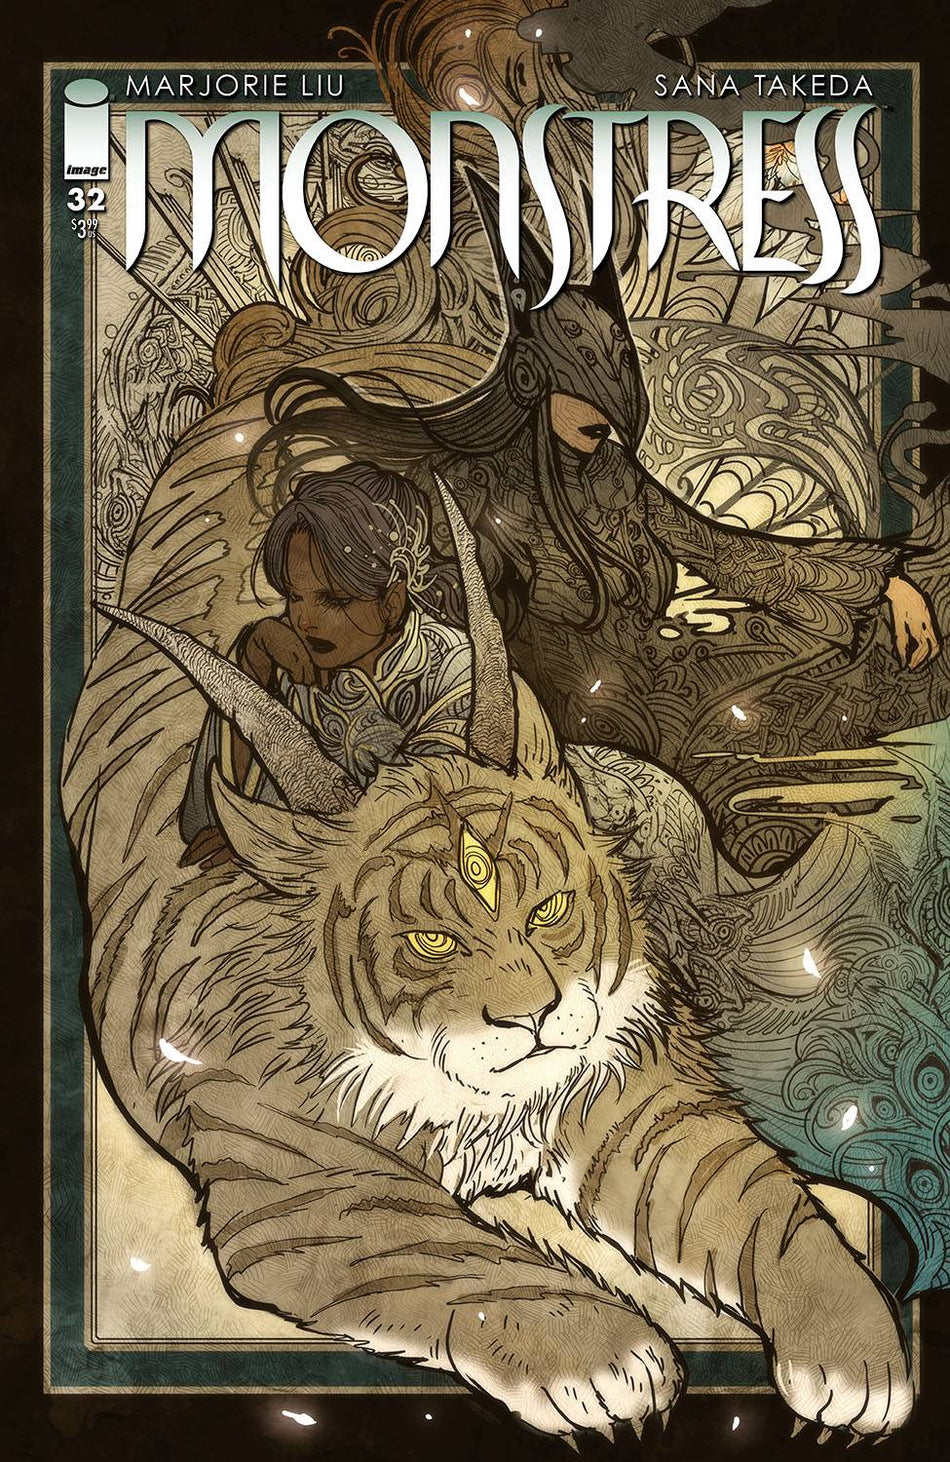 Photo of Monstress Issue 32 (MR) comic sold by Stronghold Collectibles